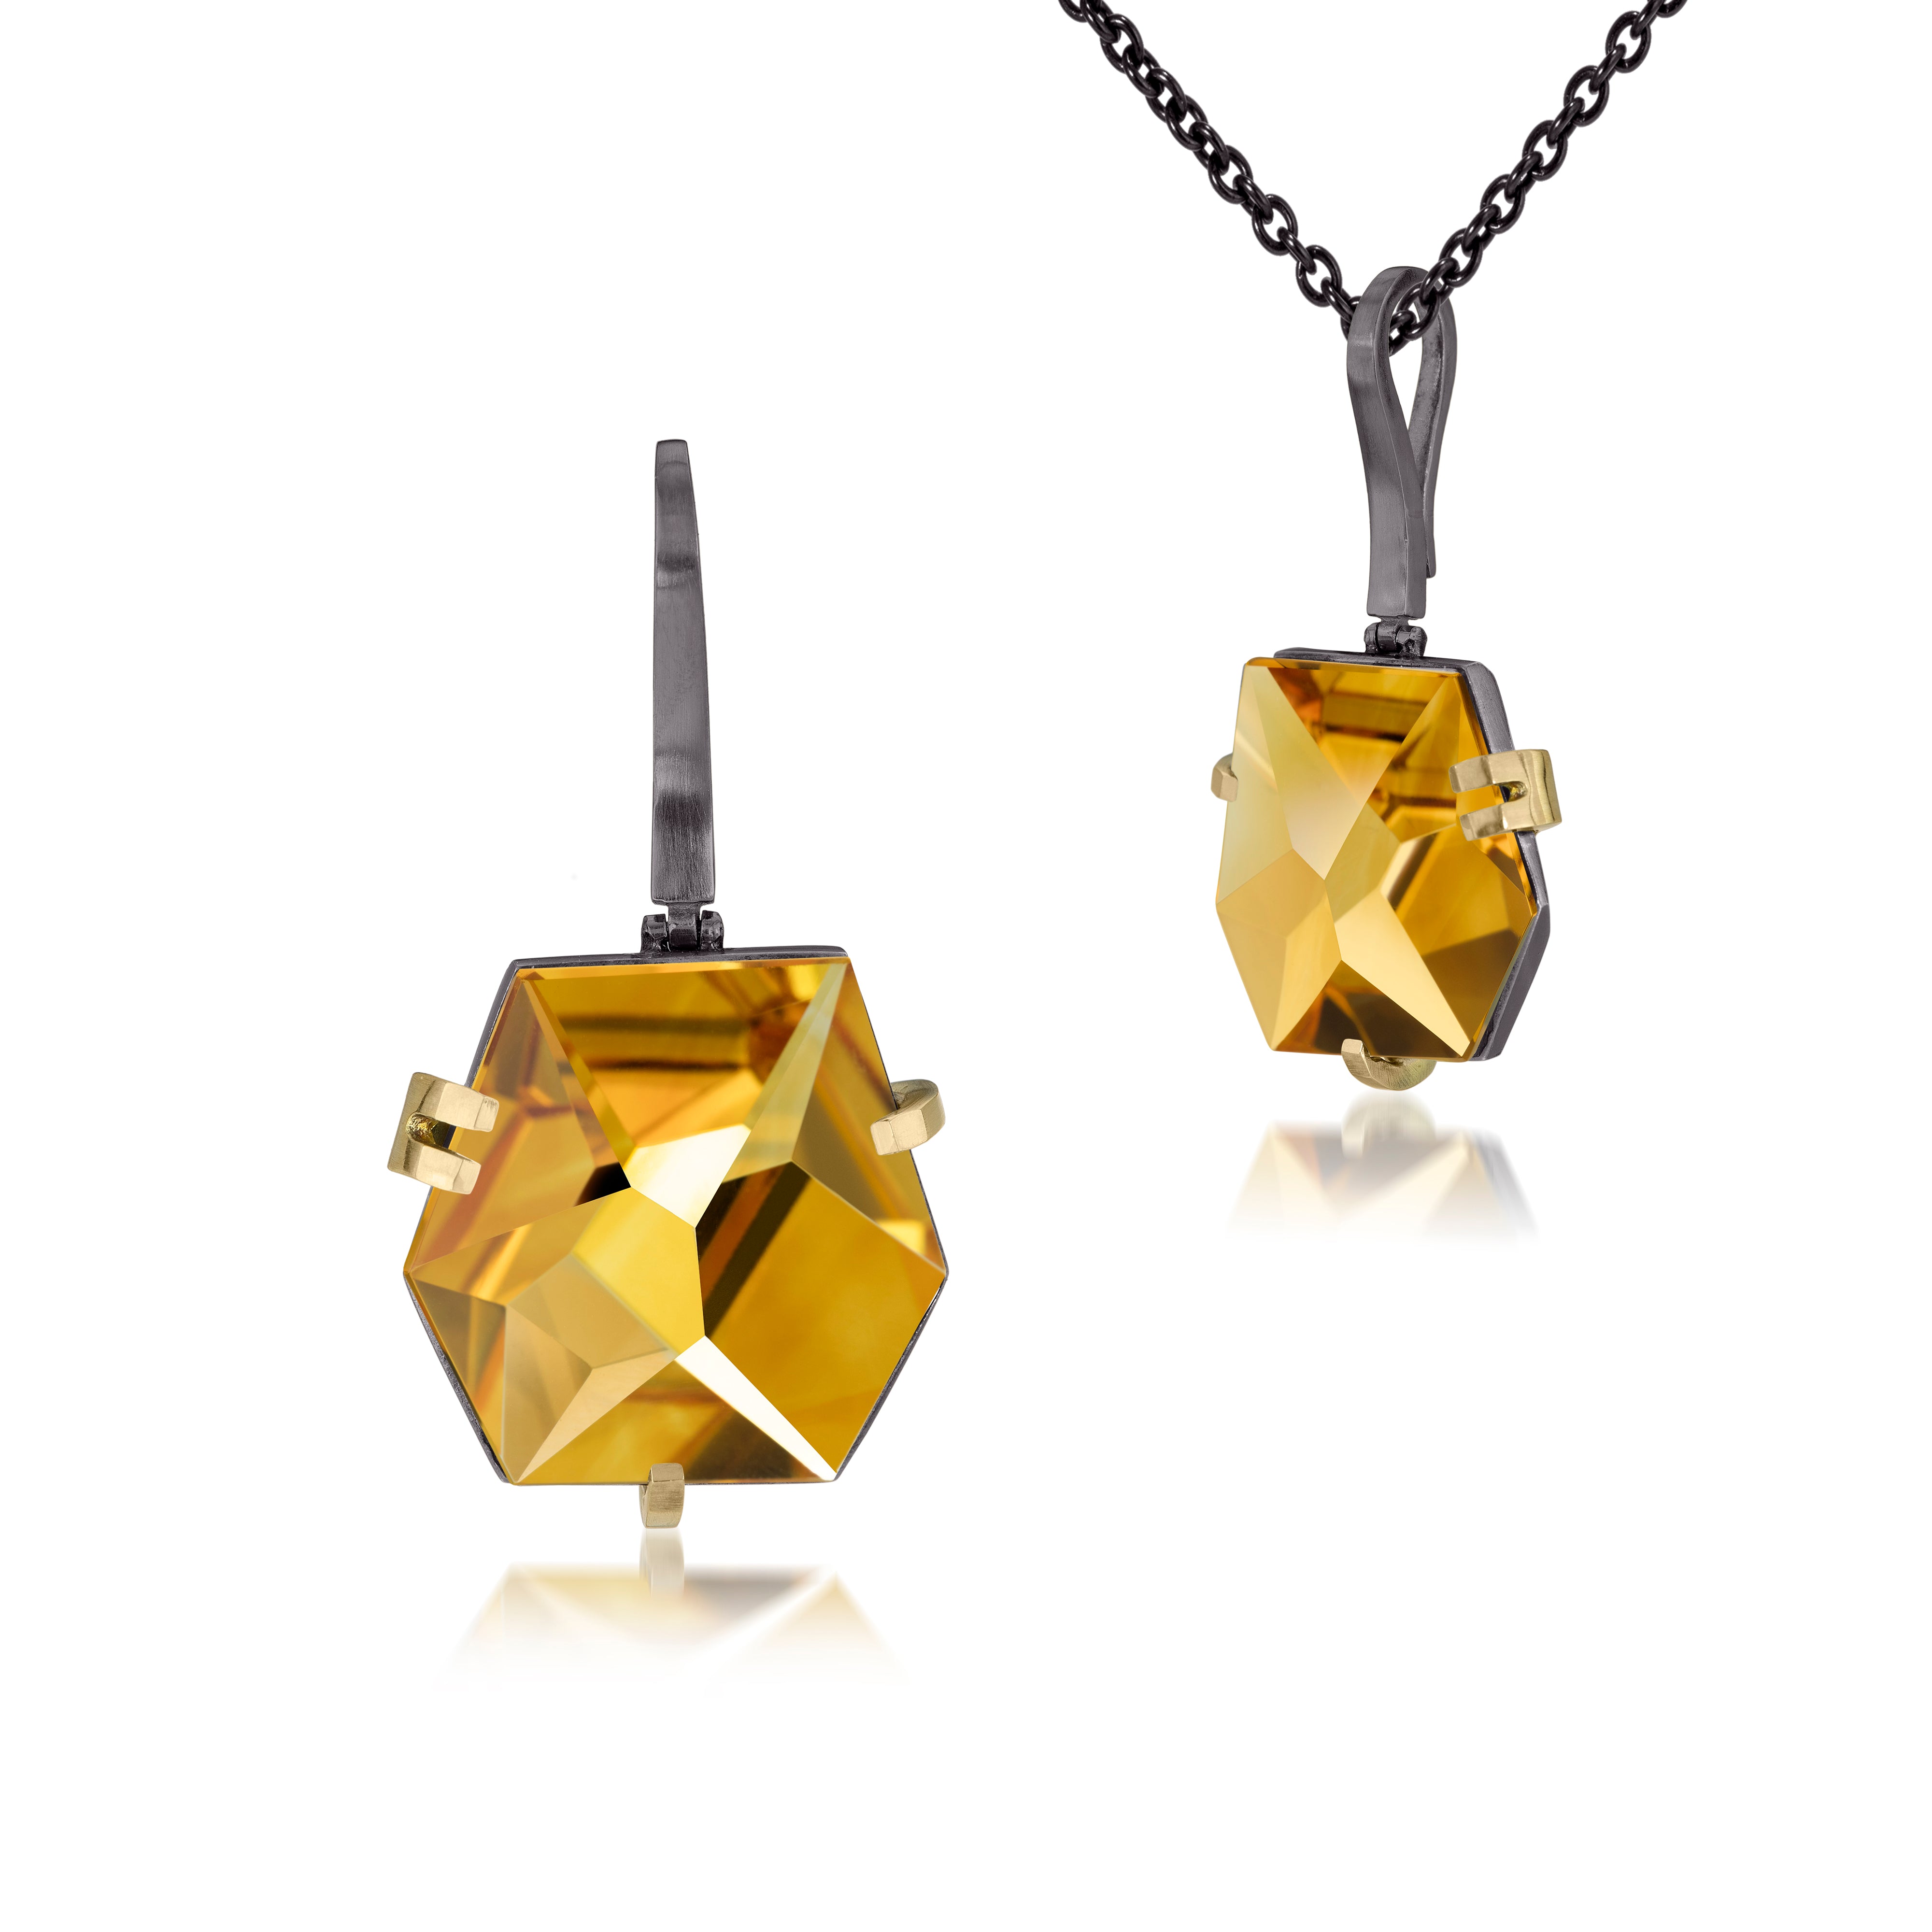 This medium size Facets pendant in oxidized sterling and 18k gold is set with natural gemstone. Unique, hand cut faceted chunks of gemstone are prong set in 18k gold prongs hang from a small bail of 18k gold or oxidized silver. 